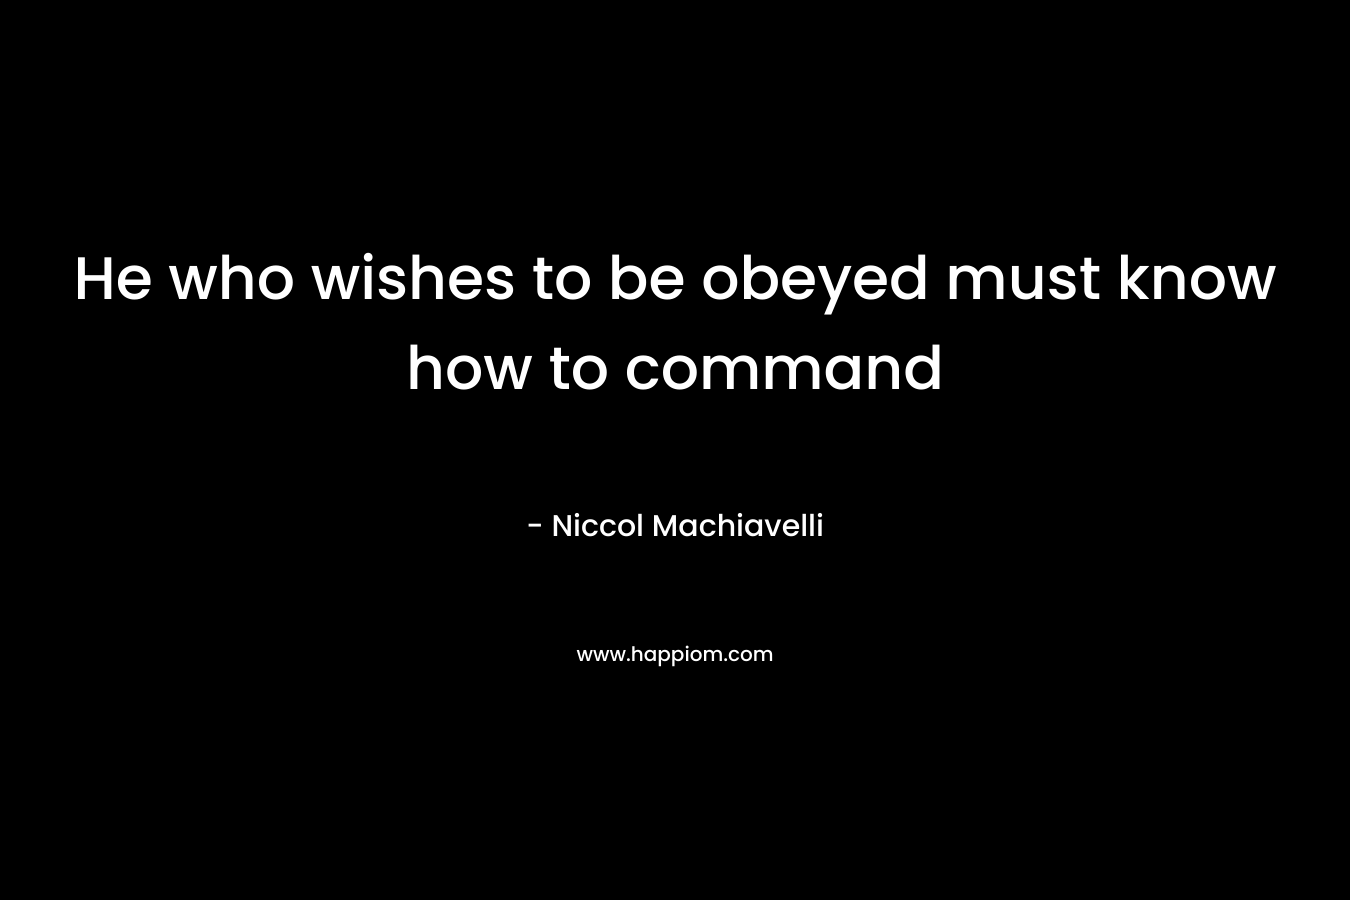 He who wishes to be obeyed must know how to command – Niccol Machiavelli